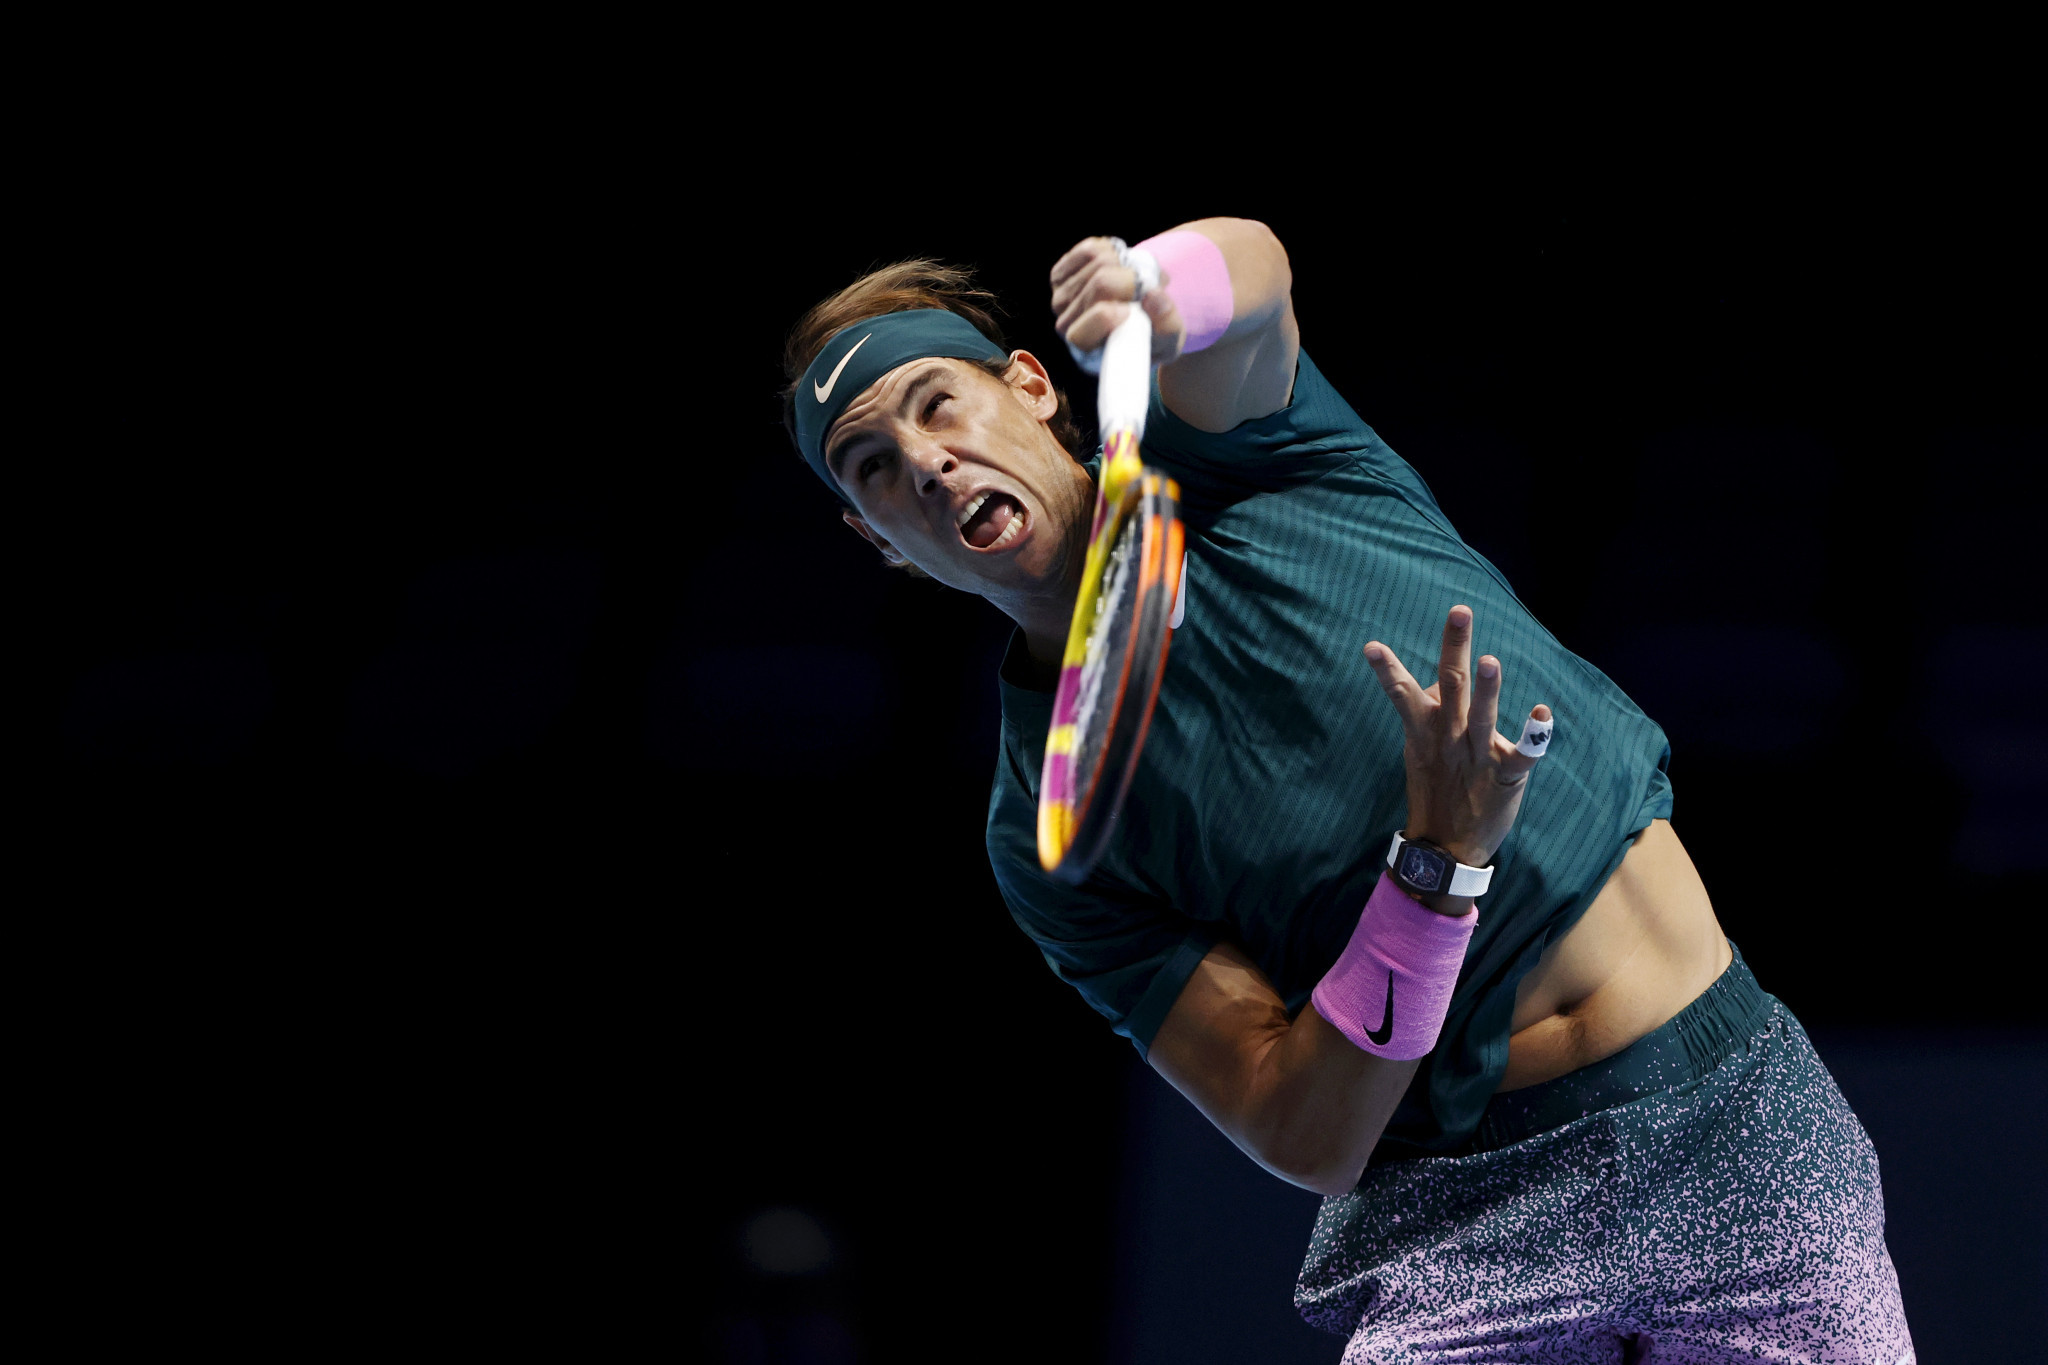 Rafael Nadal beat Andrey Rublev in straight sets in his opening ATP Finals round-robin match ©Getty Images